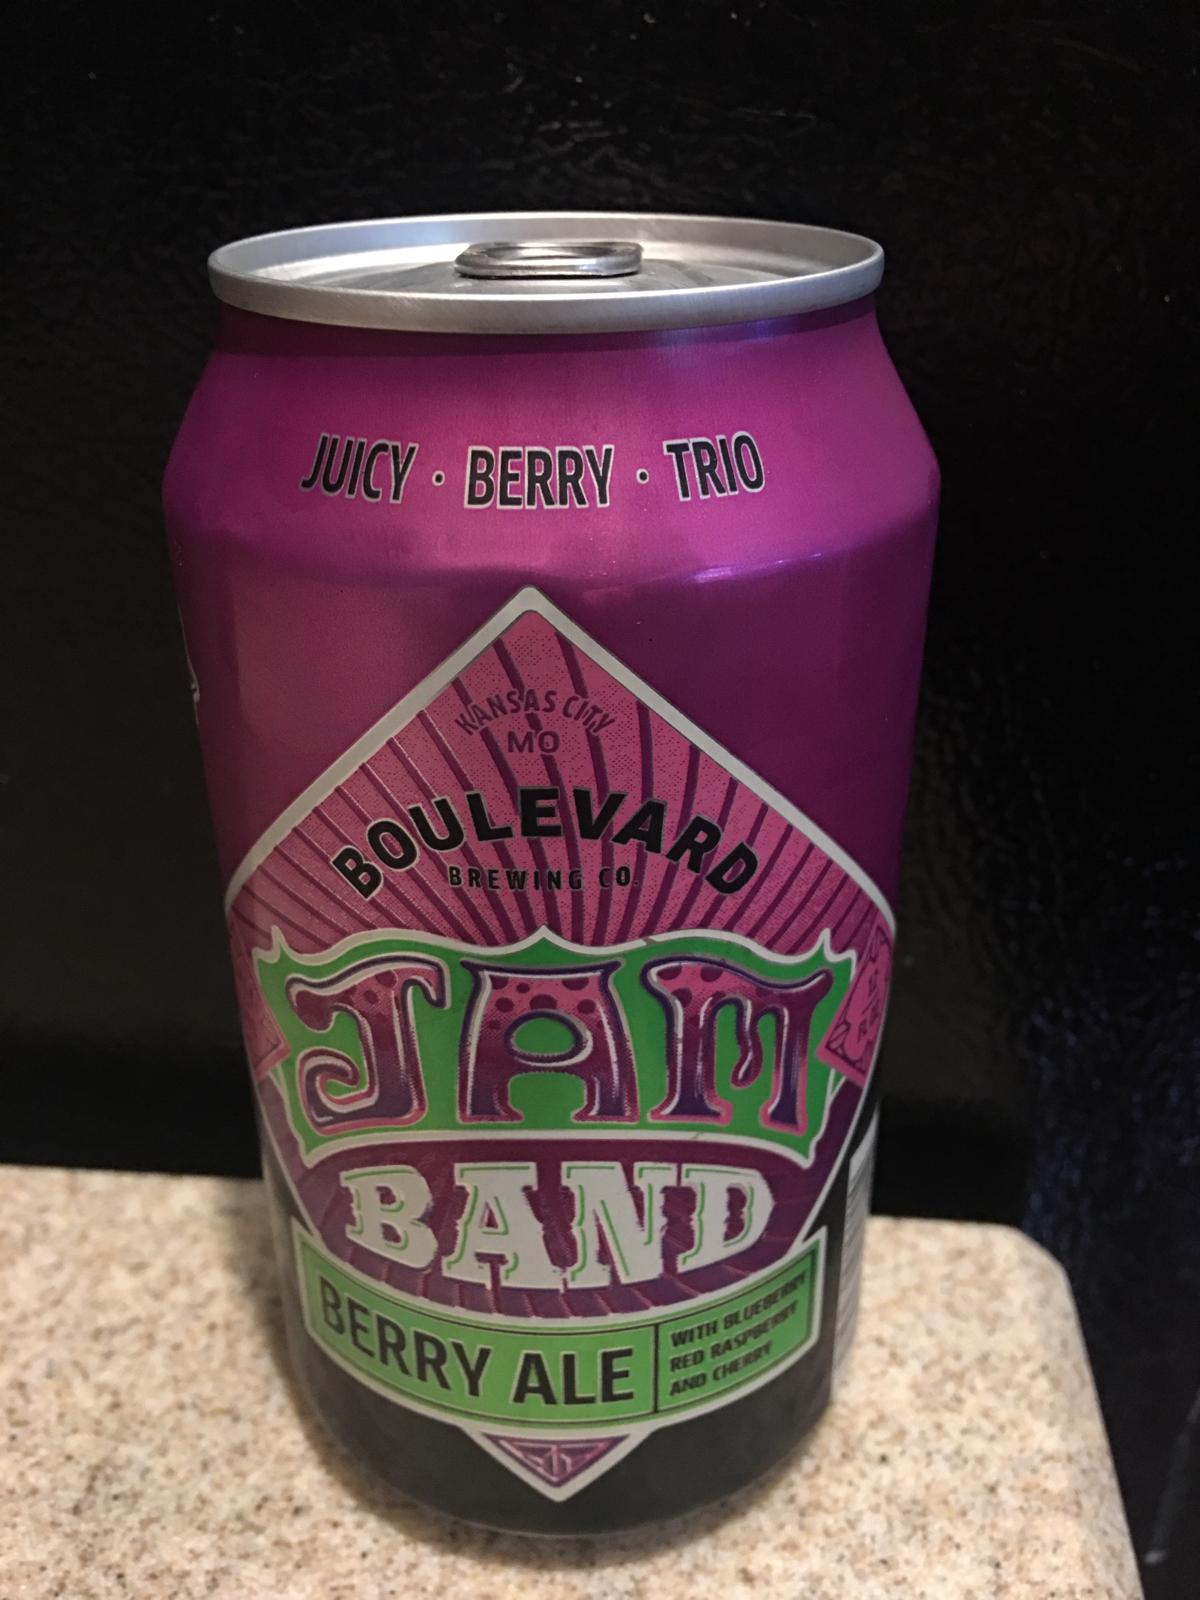 Jam Band Berry Ale